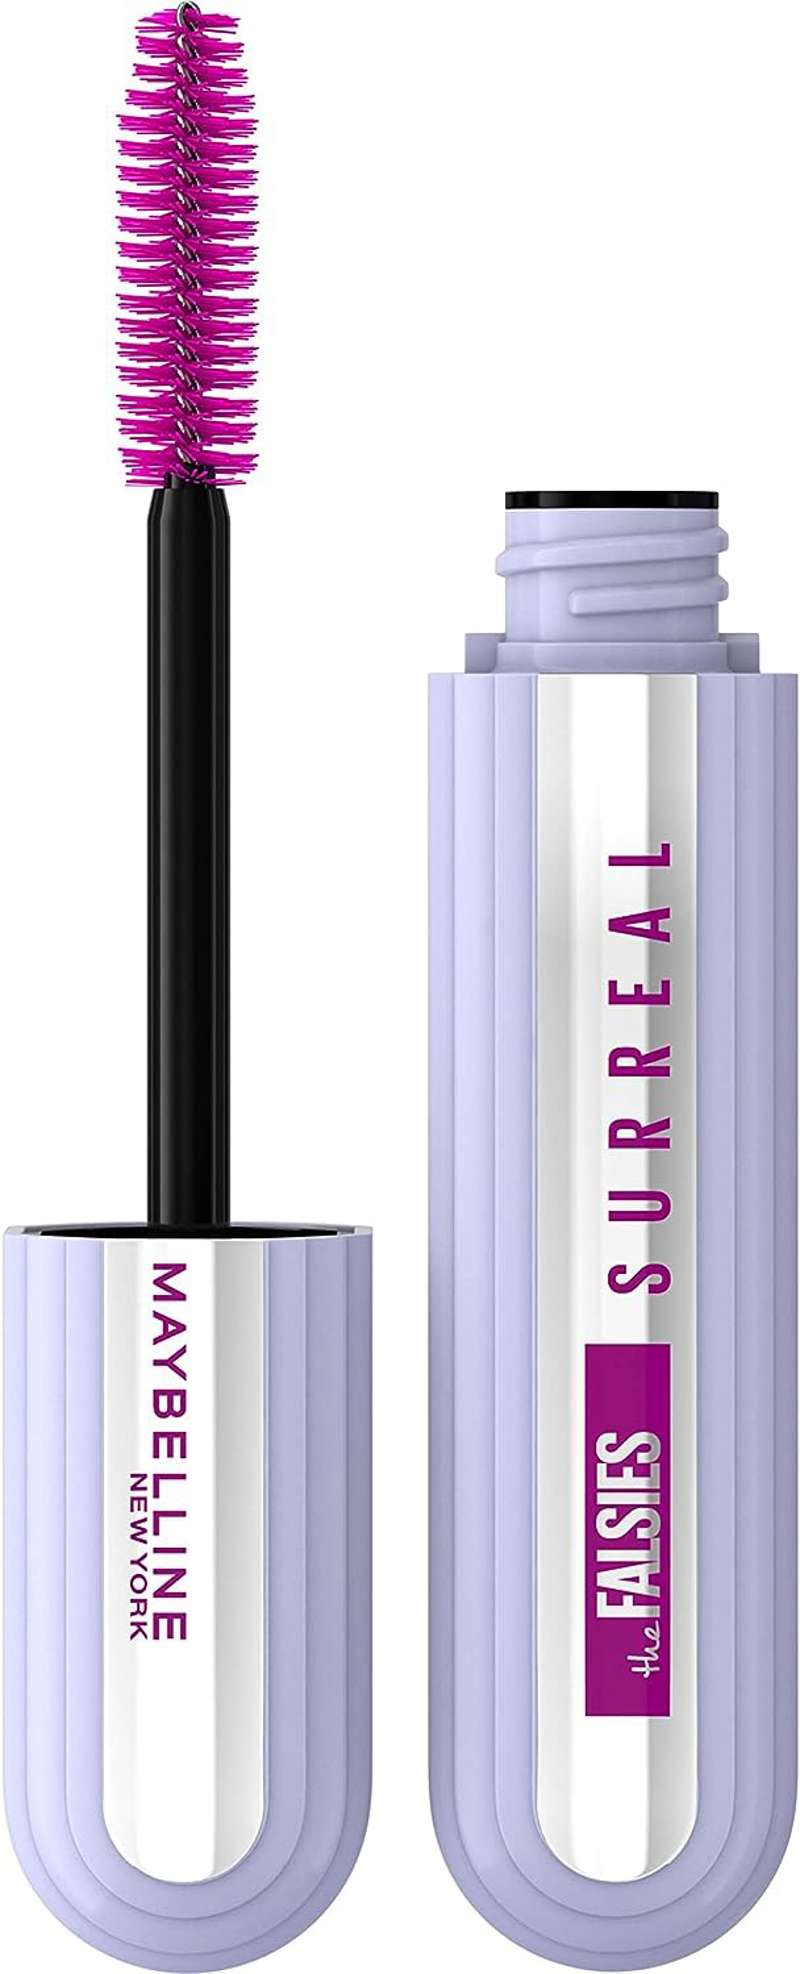 Maybelline: The Falsies Surreal Extensions Mascara